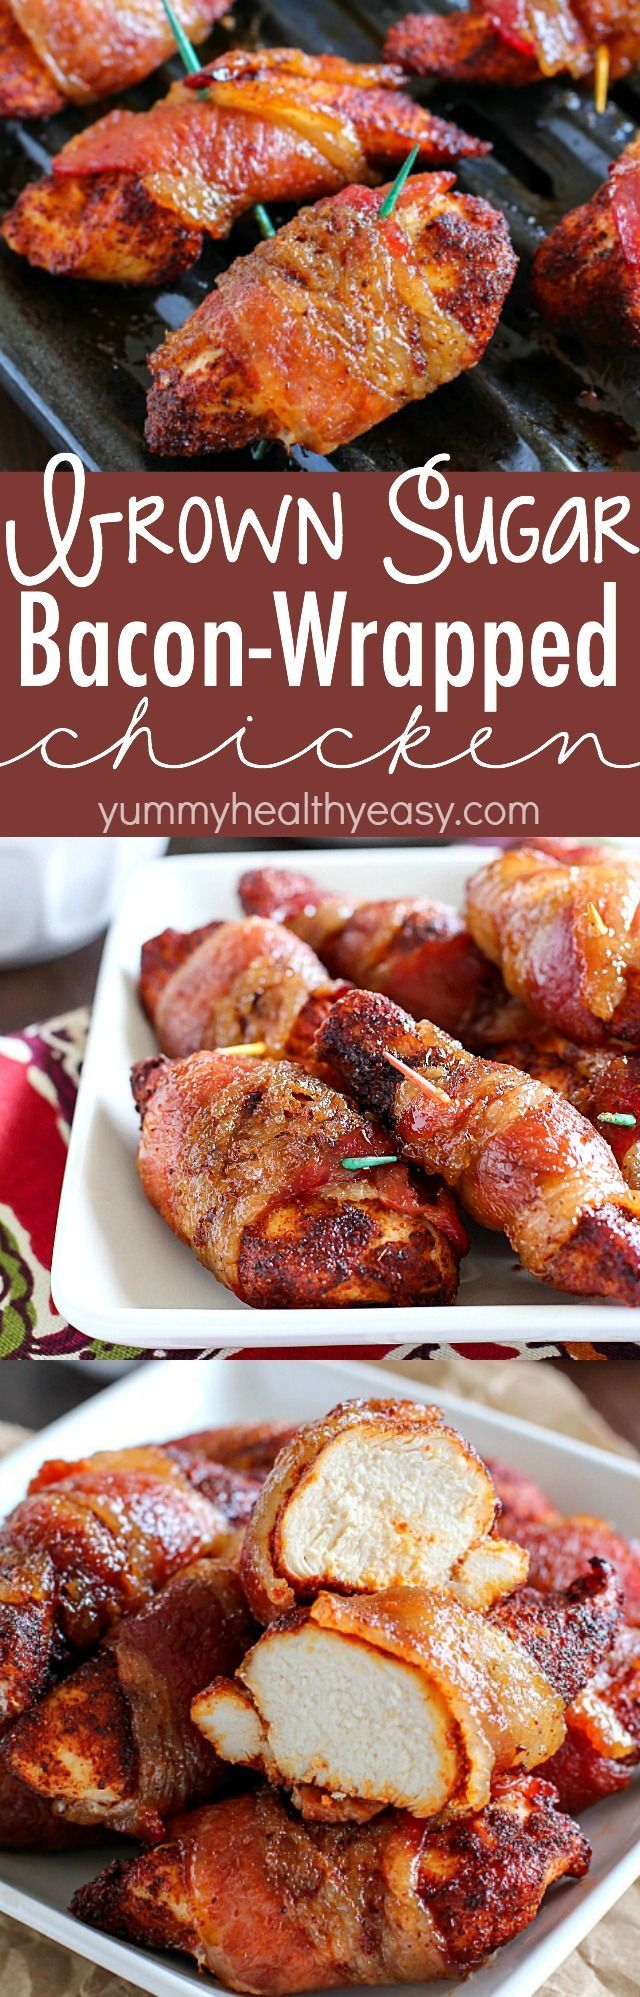 Brown Sugar Bacon Wrapped Chicken is one of my favorite dinners! Making this again tonight! You roll t